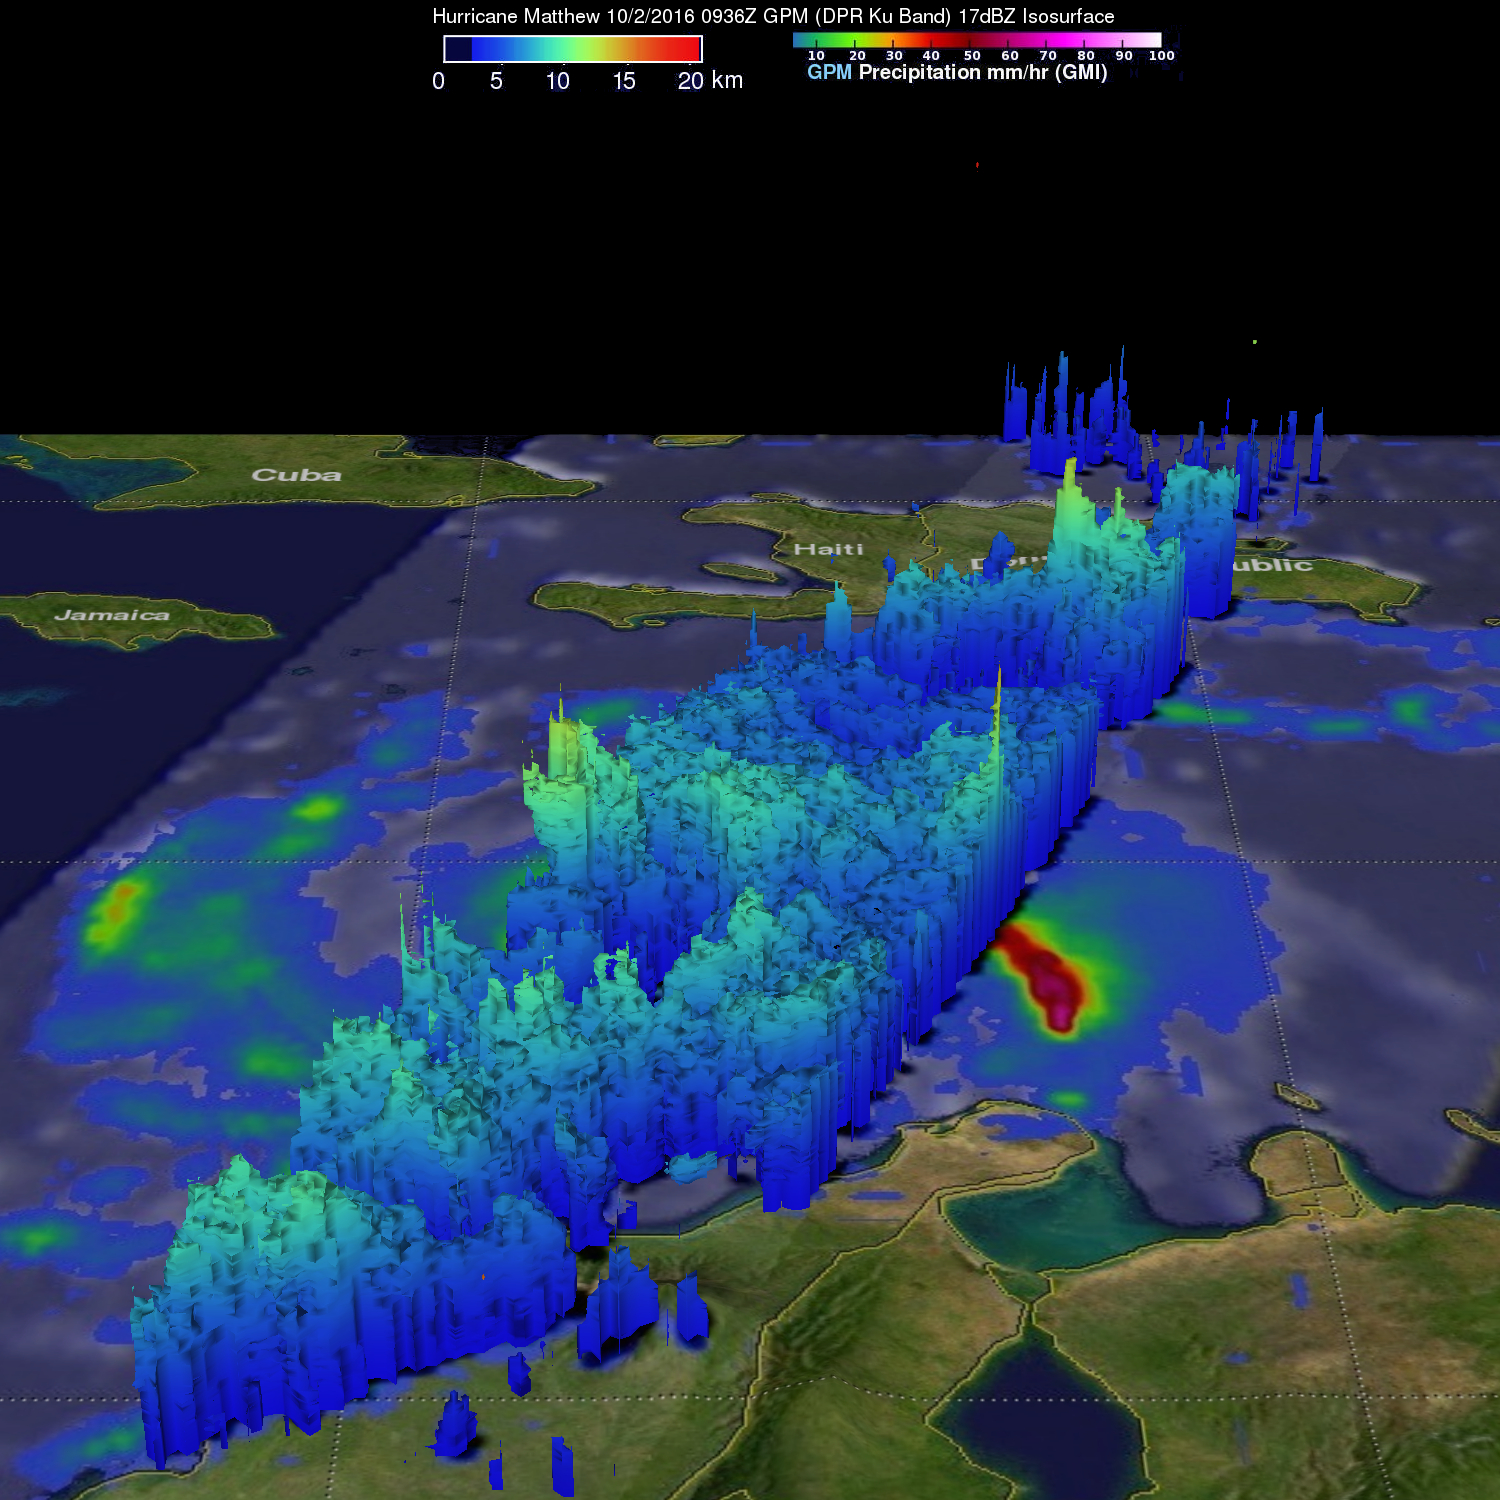 GPM image of Matthew, which shows 3D clouds, which rise up like towers.